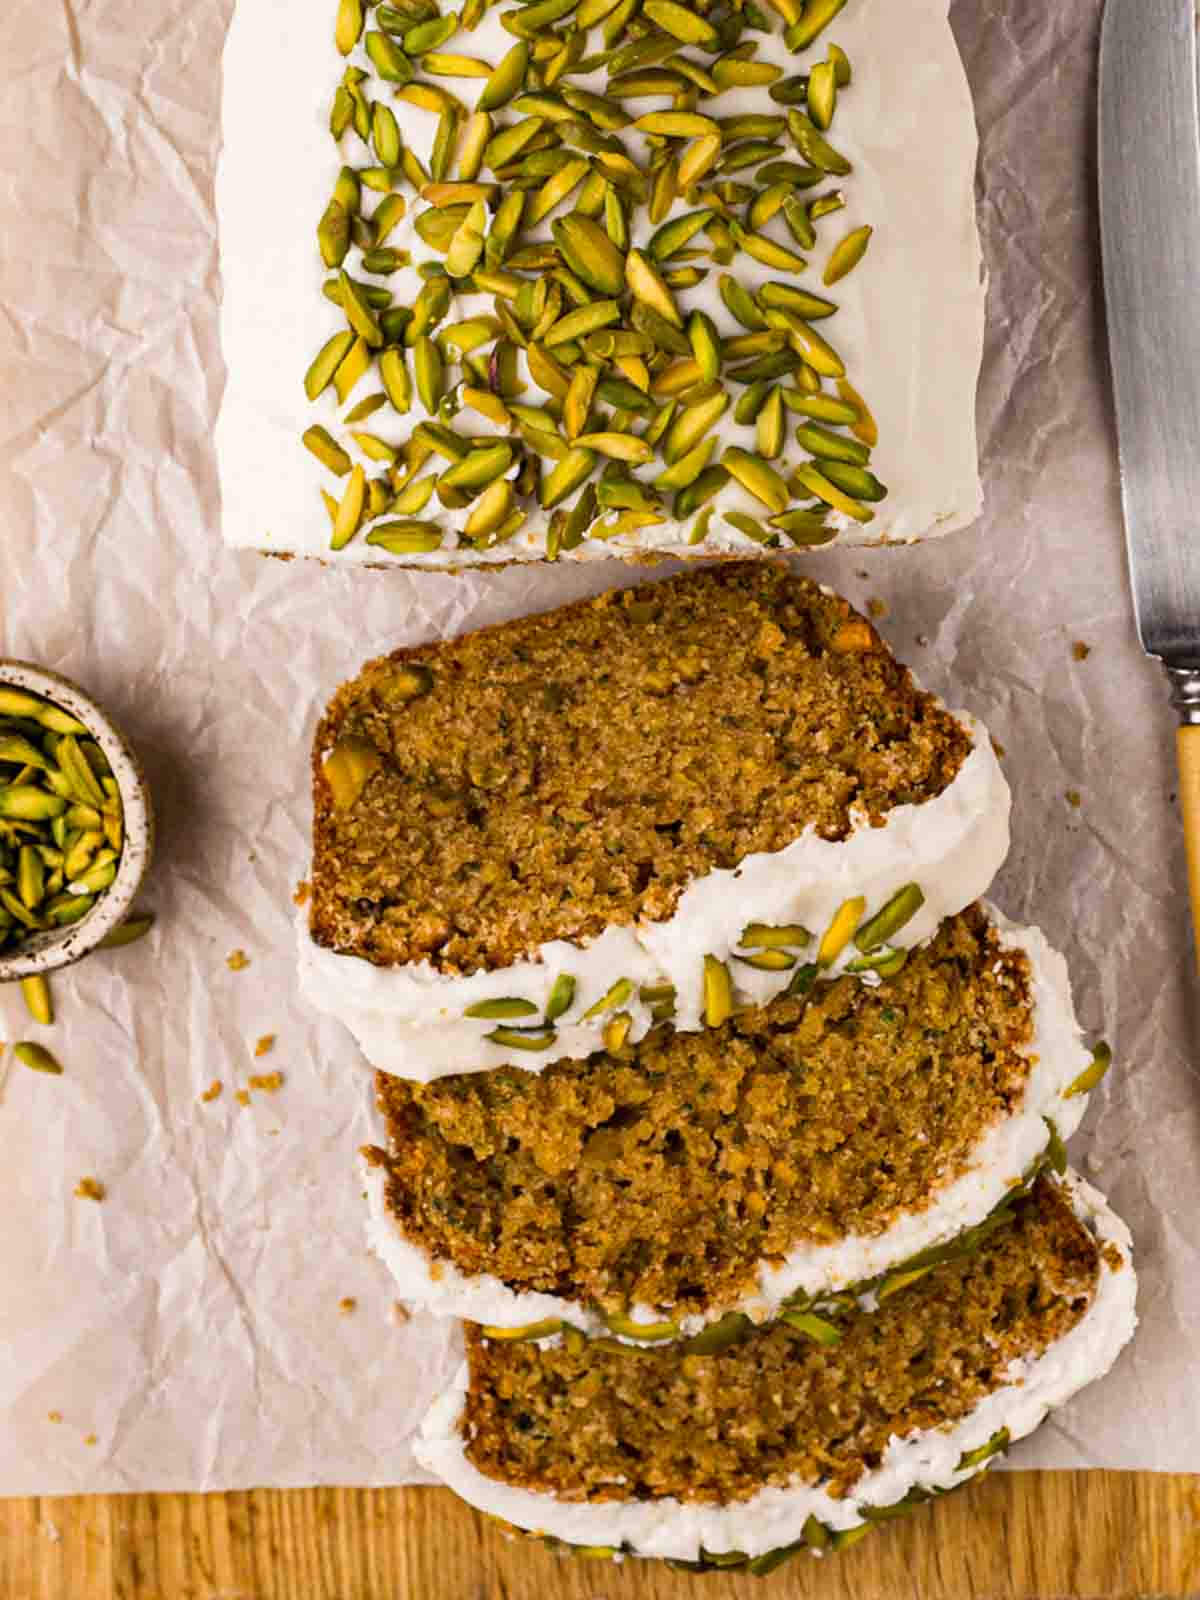 A bird's eye view of a Courgette Cake, sliced with buttercream frosting and pistachios.